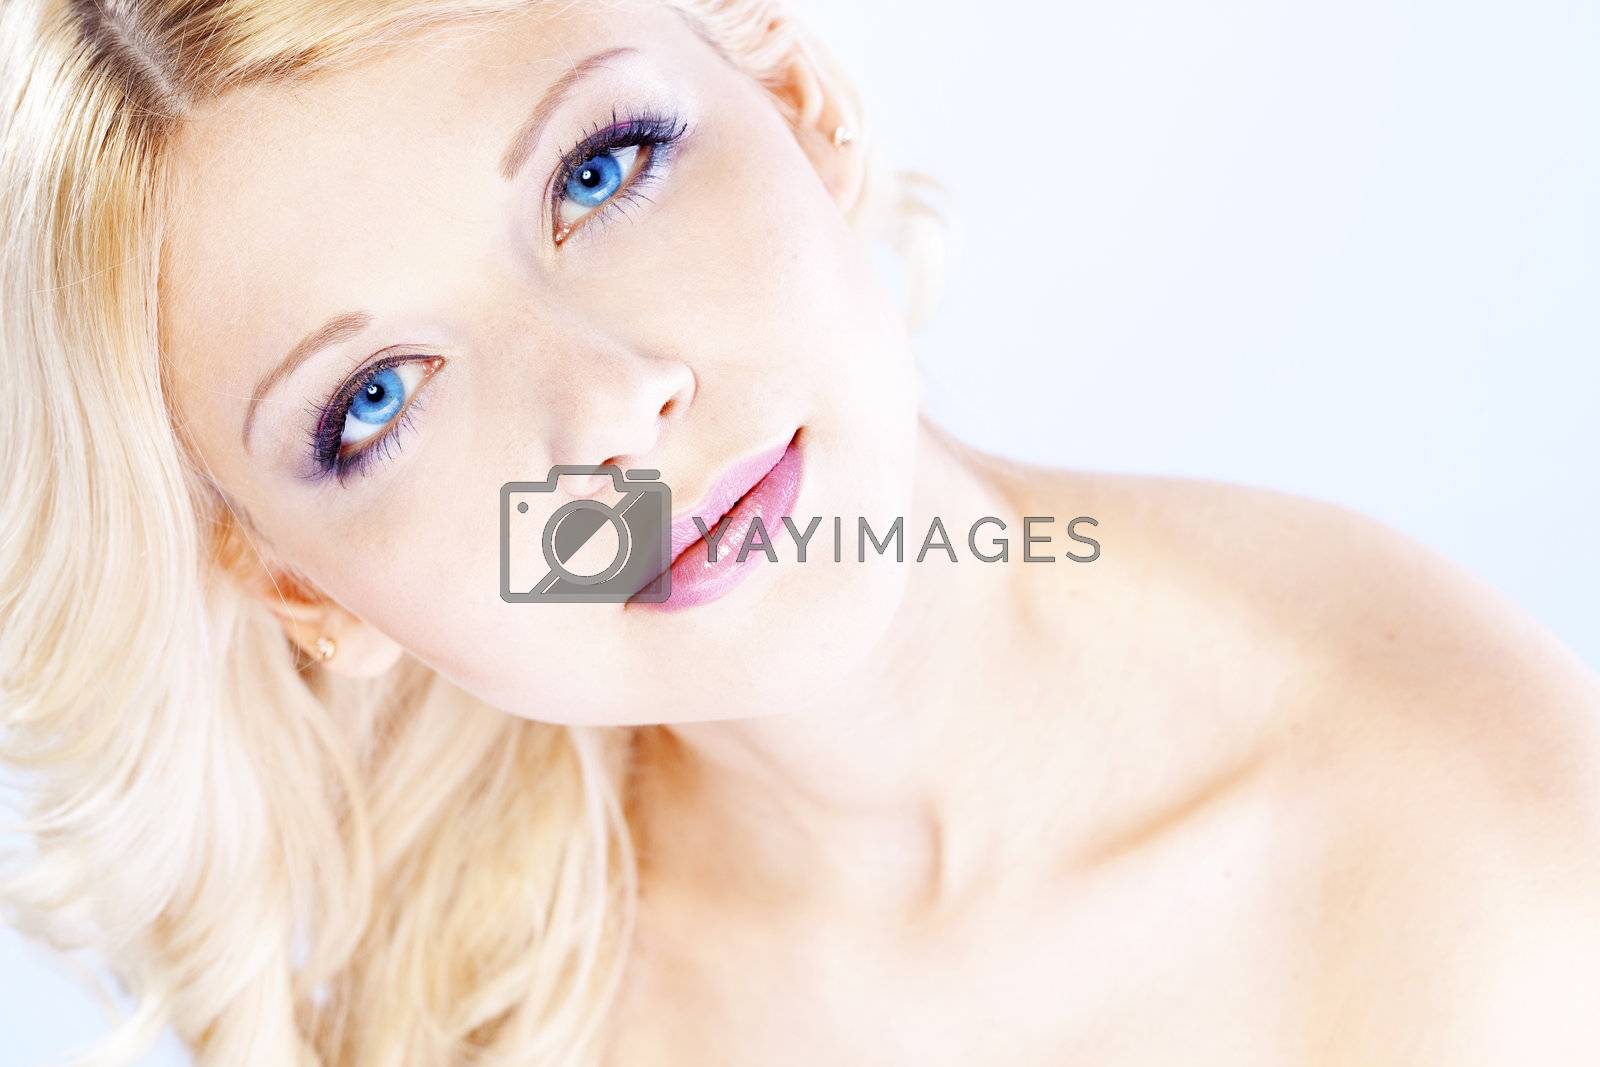 Portrait of young beautiful blond woman with fashion make-up and hairstyle